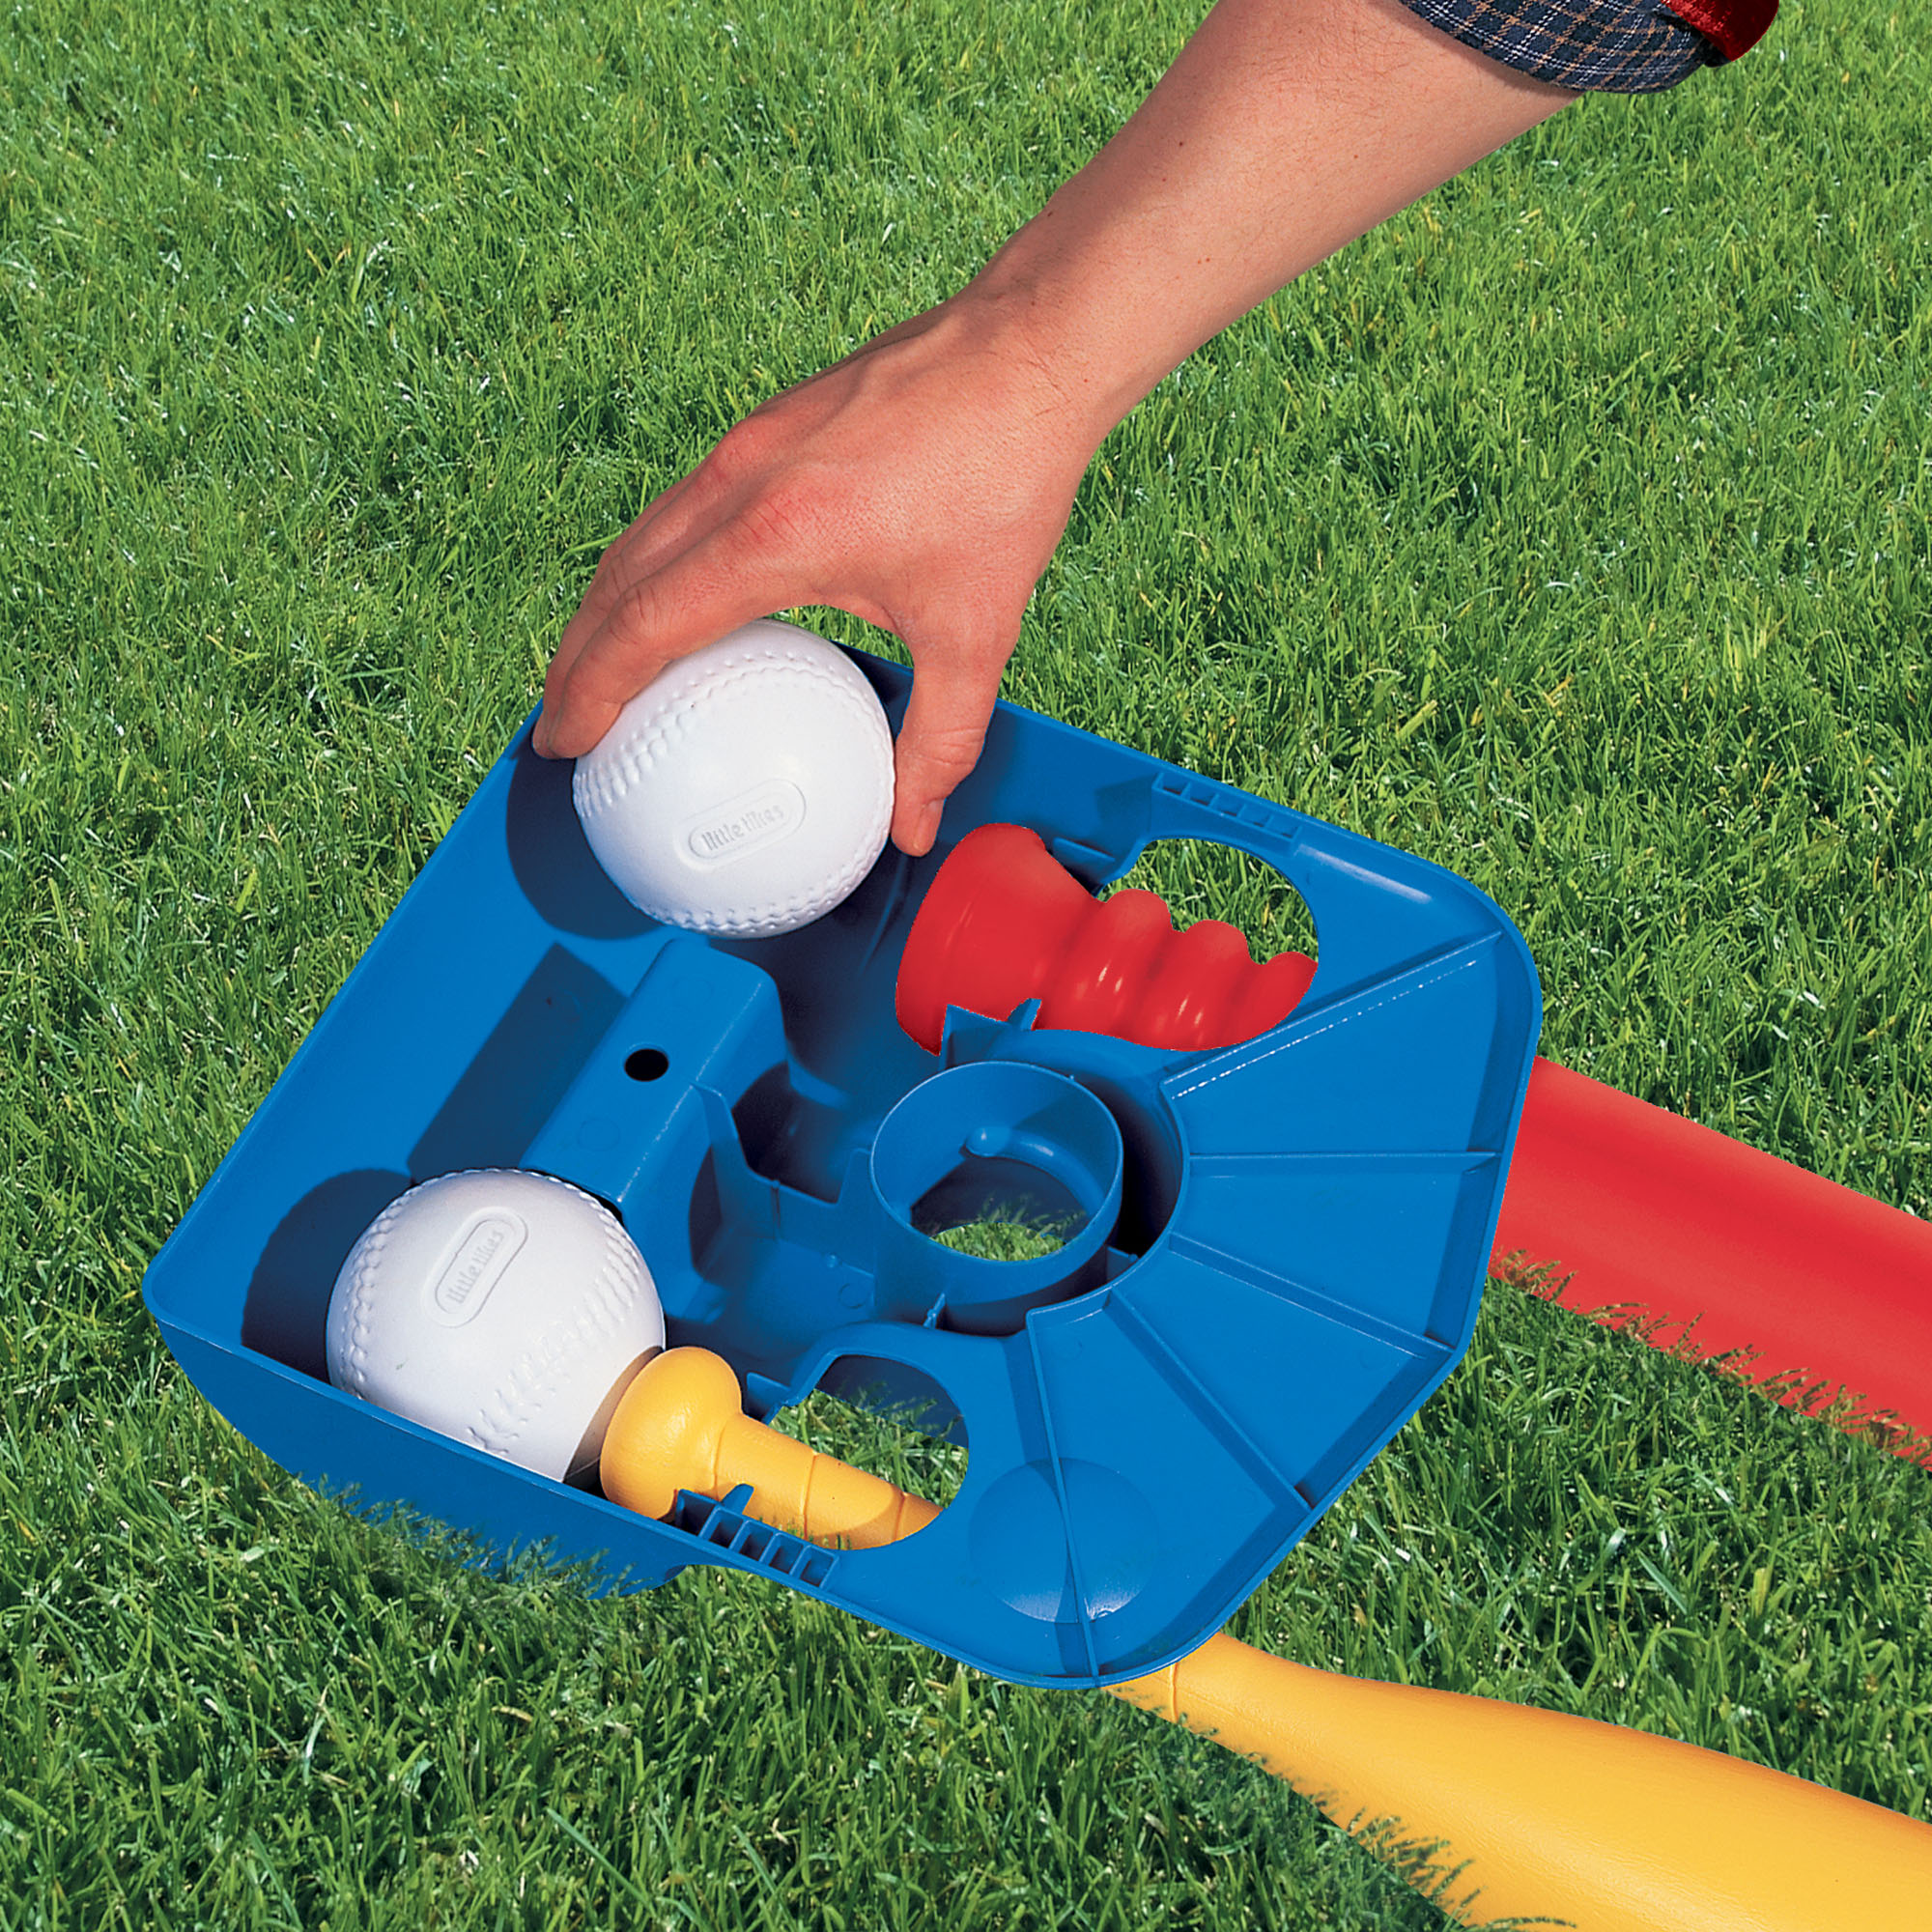 Little Tikes TotSports Kids T-Ball Set with Bat and 2 Balls, Ages 18 Months to 4 Years - image 5 of 6